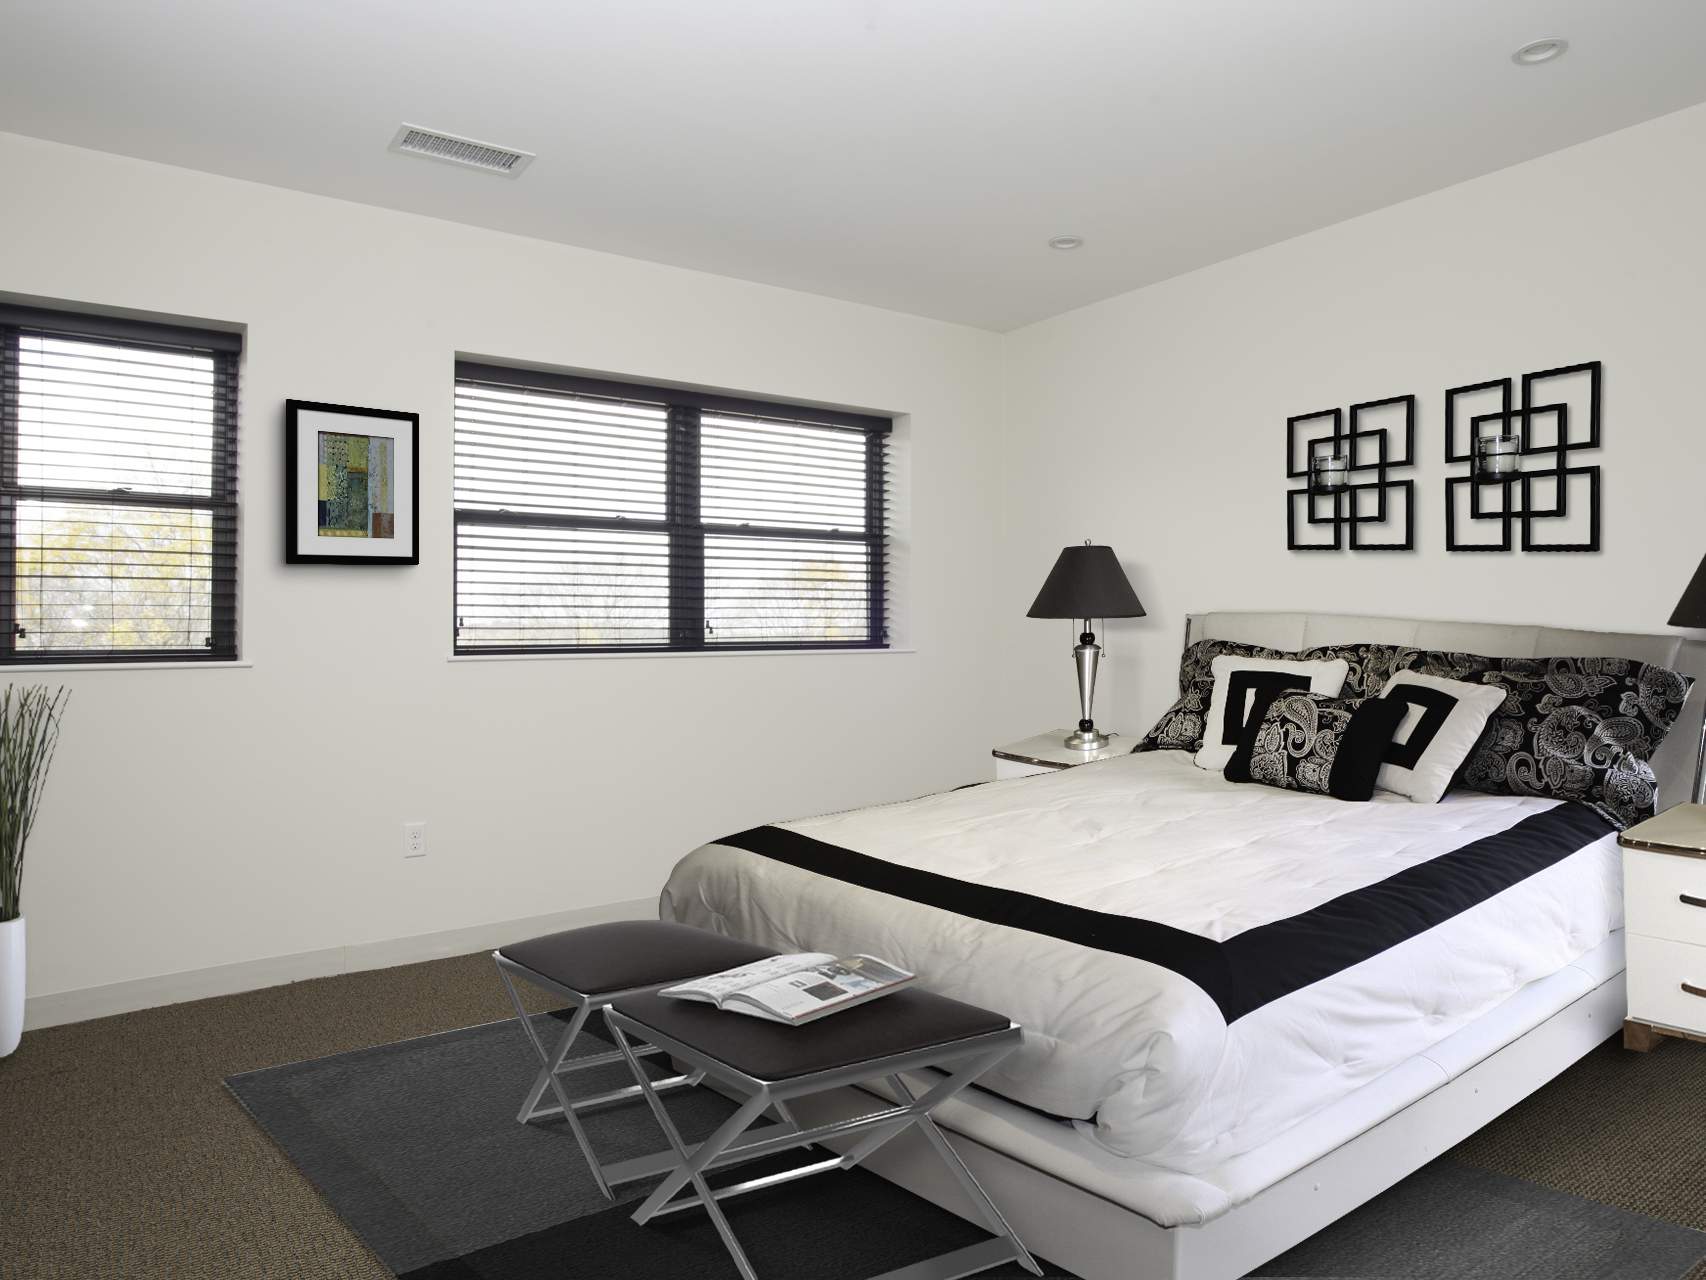 1 & 2 Bedroom Apartments in Quincy, MA - Quarry Edge 455